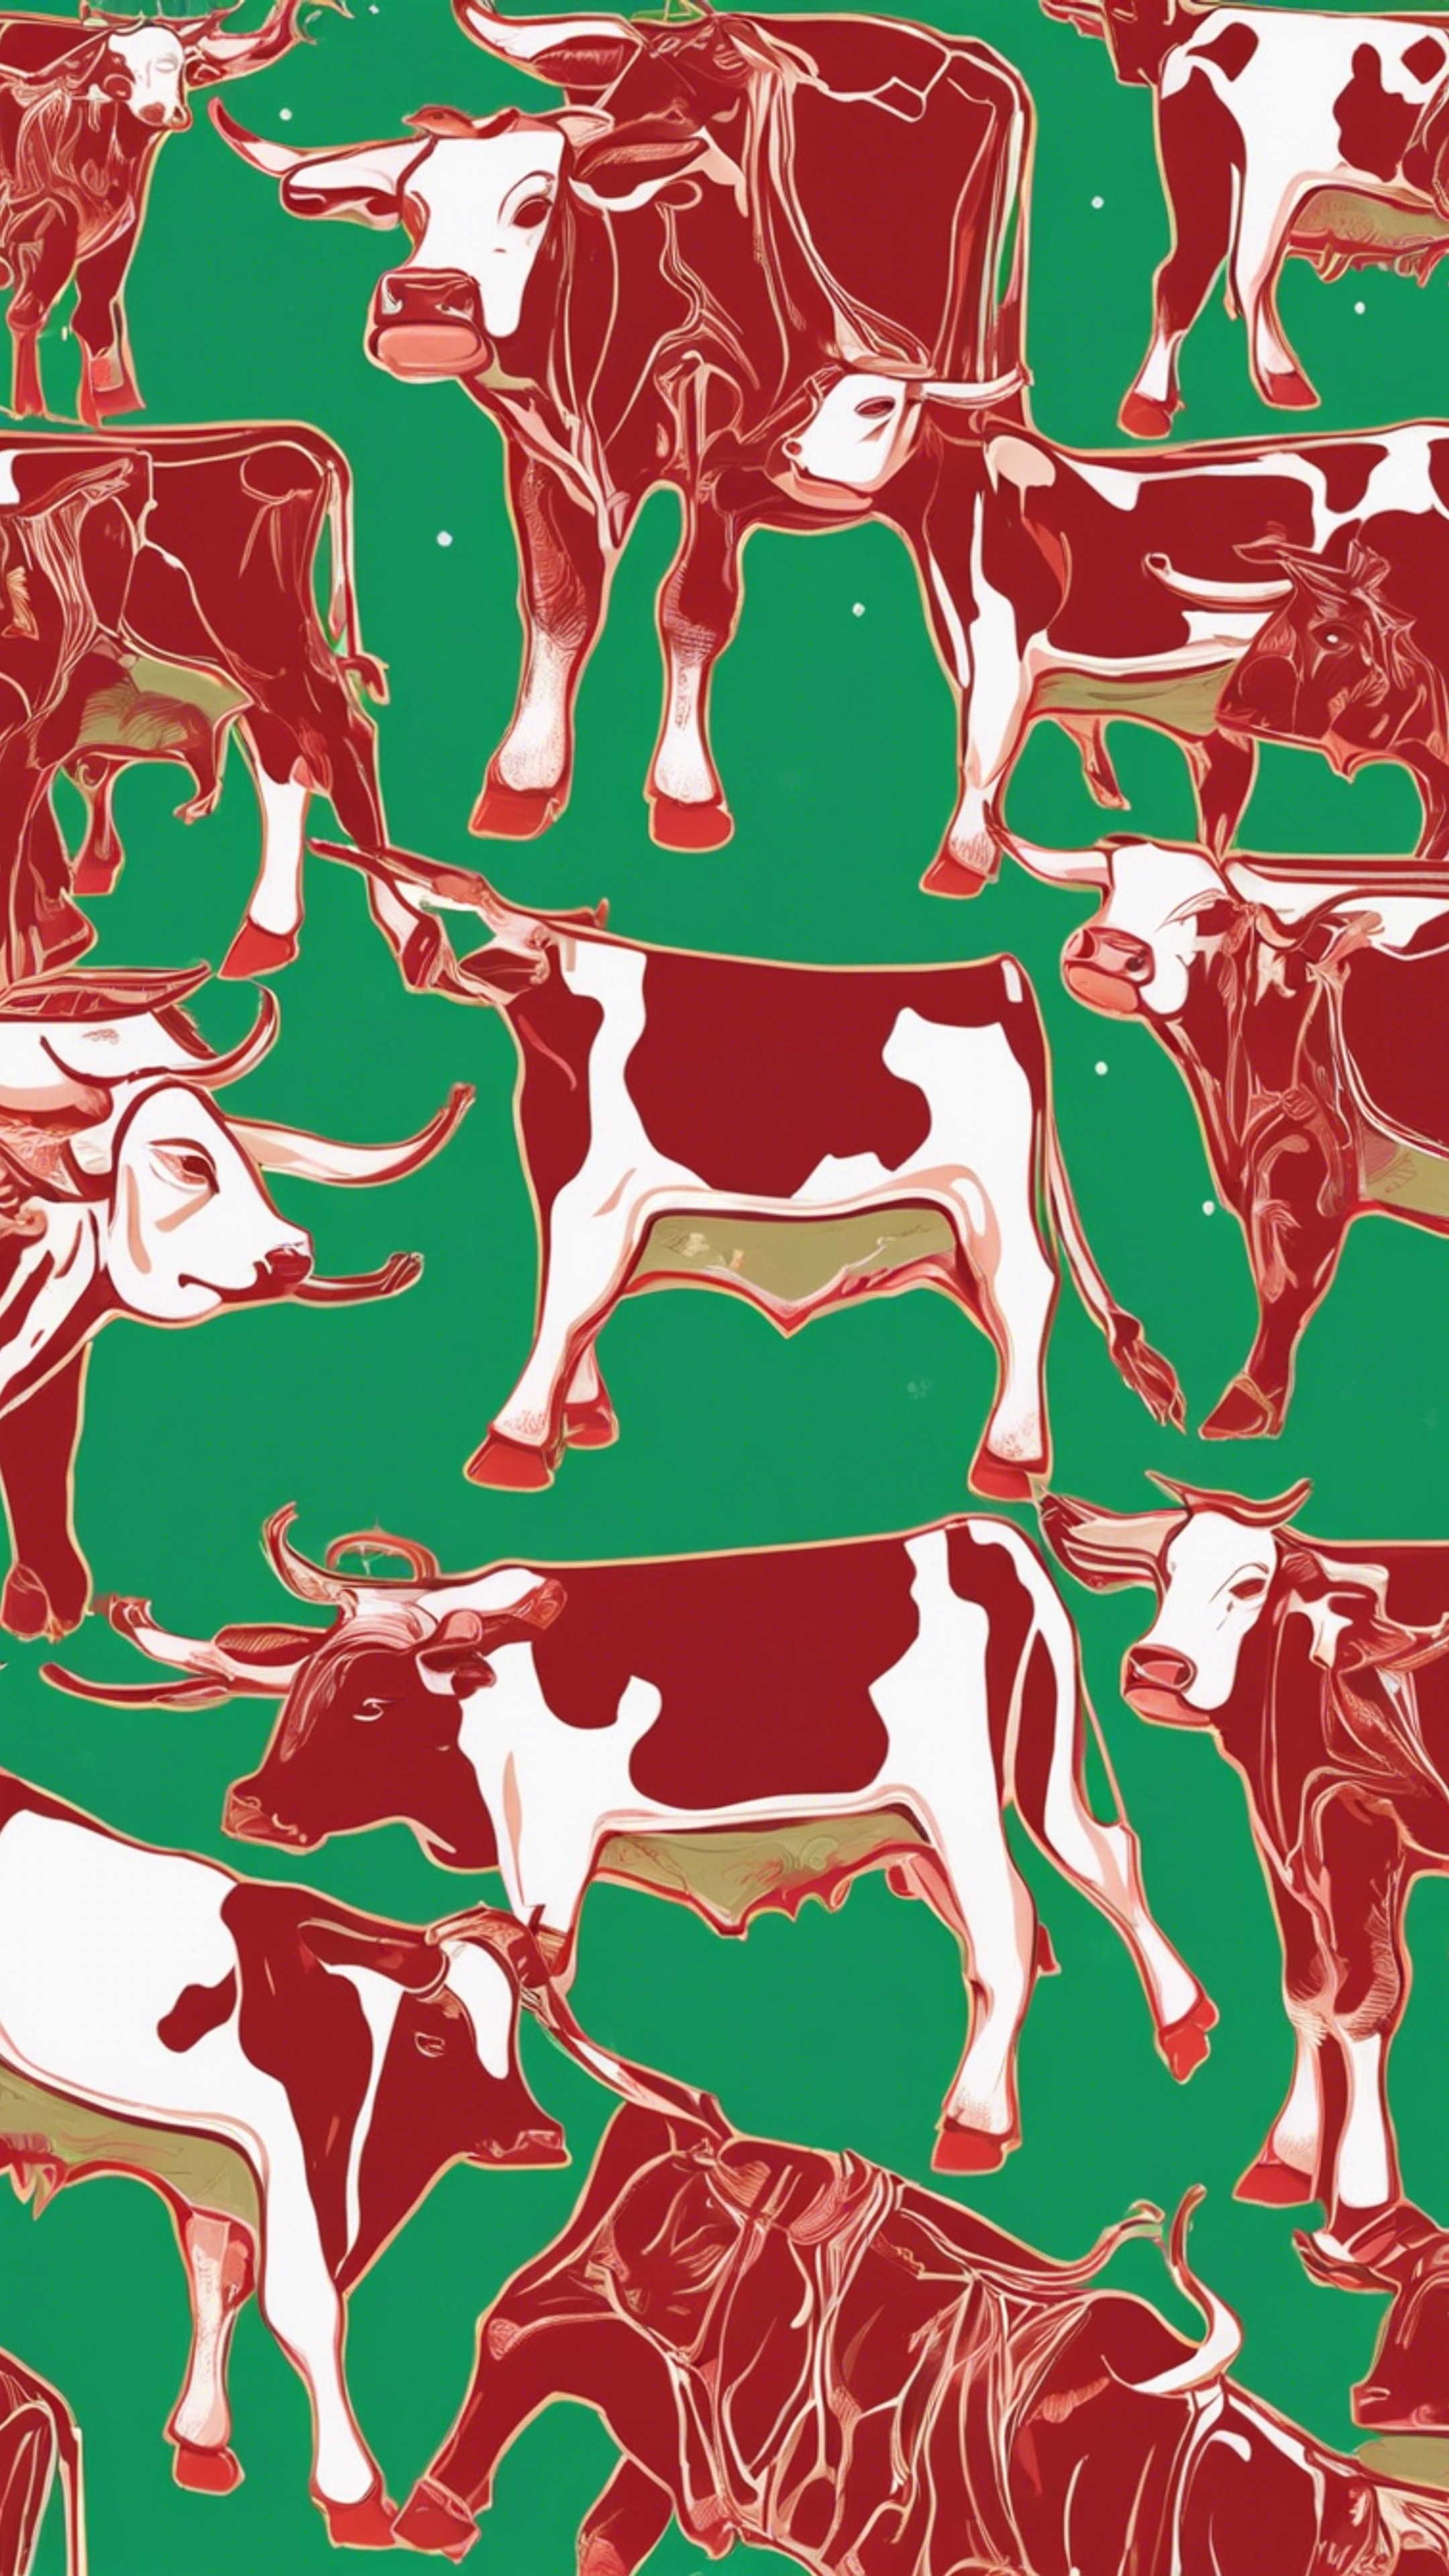 An abstract art featuring earthy green and vibrant red cow patterns. Tapeta[bce8b500f11040f088c2]